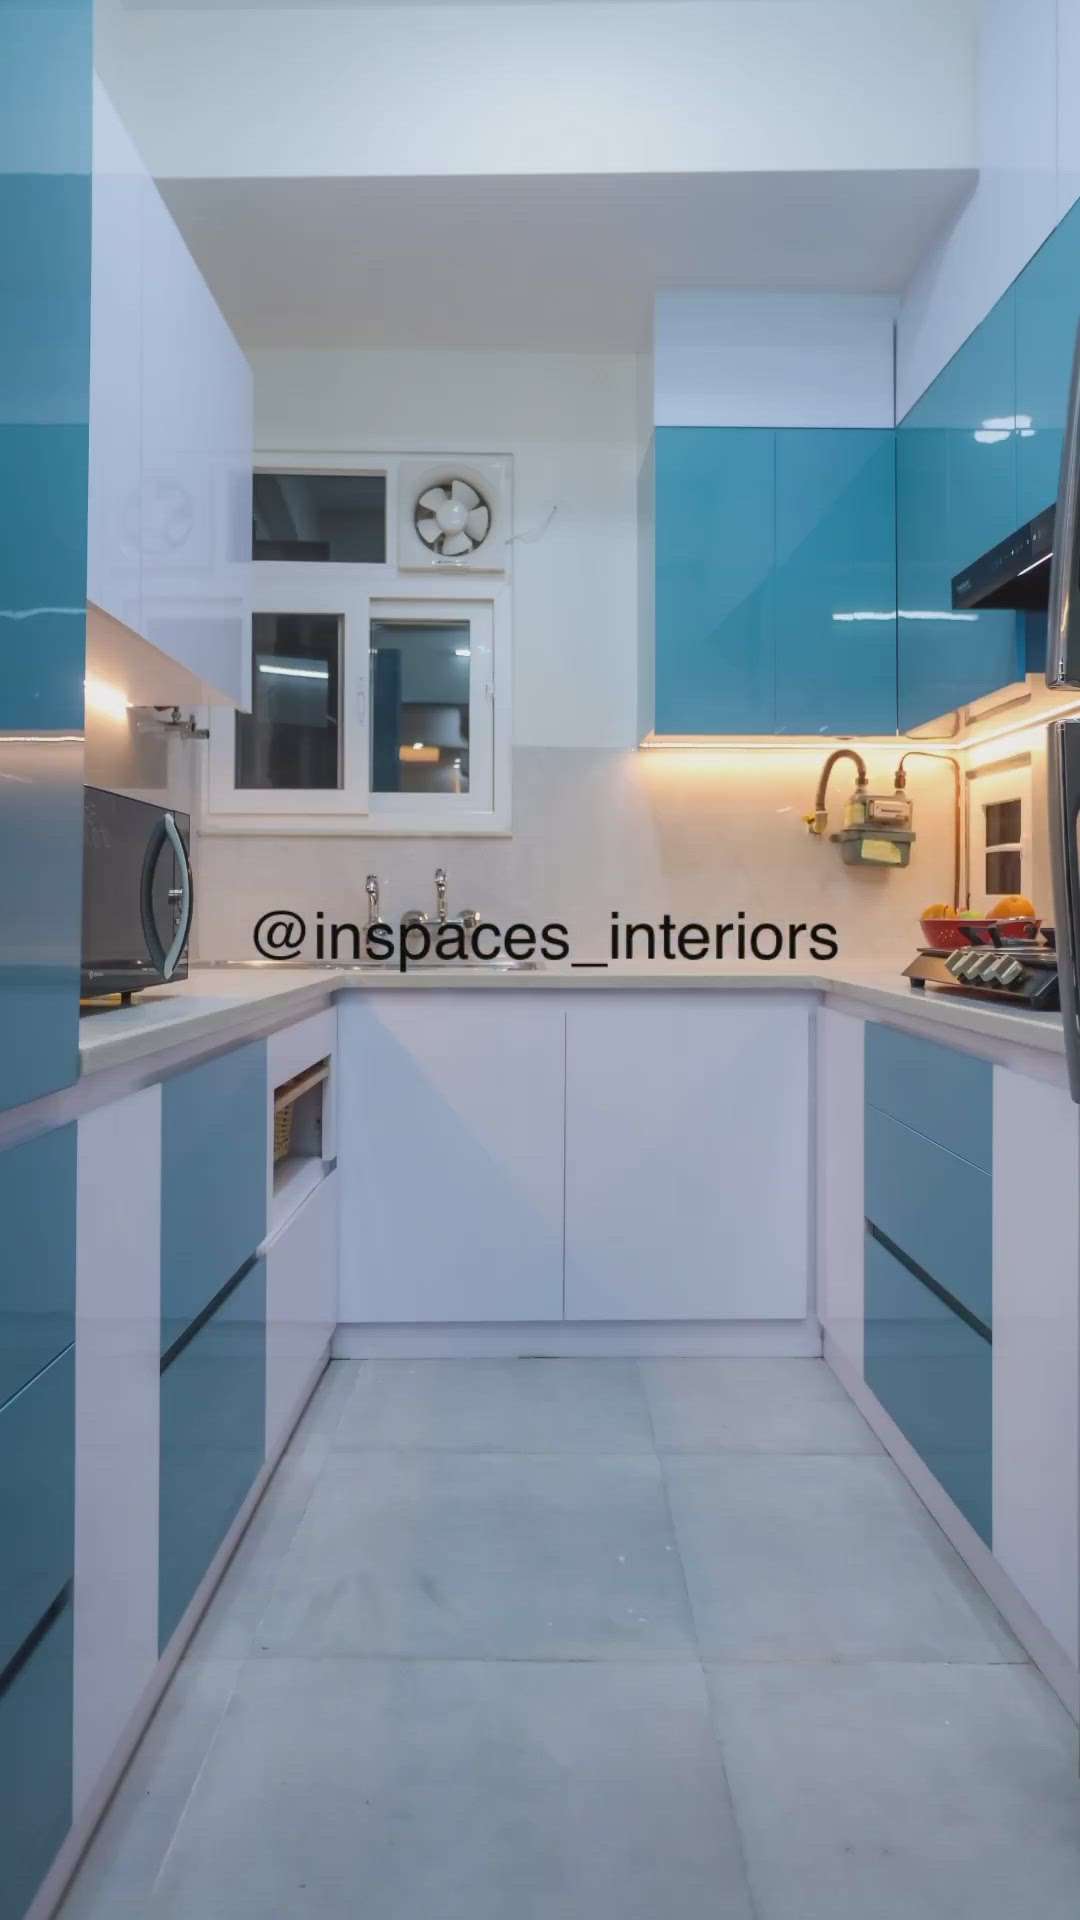 Inspaces complete interior services done one more residential project at dwarka sec. 10, Delhi
 #mbrfurnitures  #GuestRoom  #kidsroominterior  #LivingroomDesigns  #ModularKitchen  #wardrobes  #studytable  #diningroomdecor  #WallPainting  #tilingwork  #FalseCeiling  #upvcwindows  #CelingLights  #tvunits  #maindoor  #Washroom  #duco-paint  #BalconyIdeas